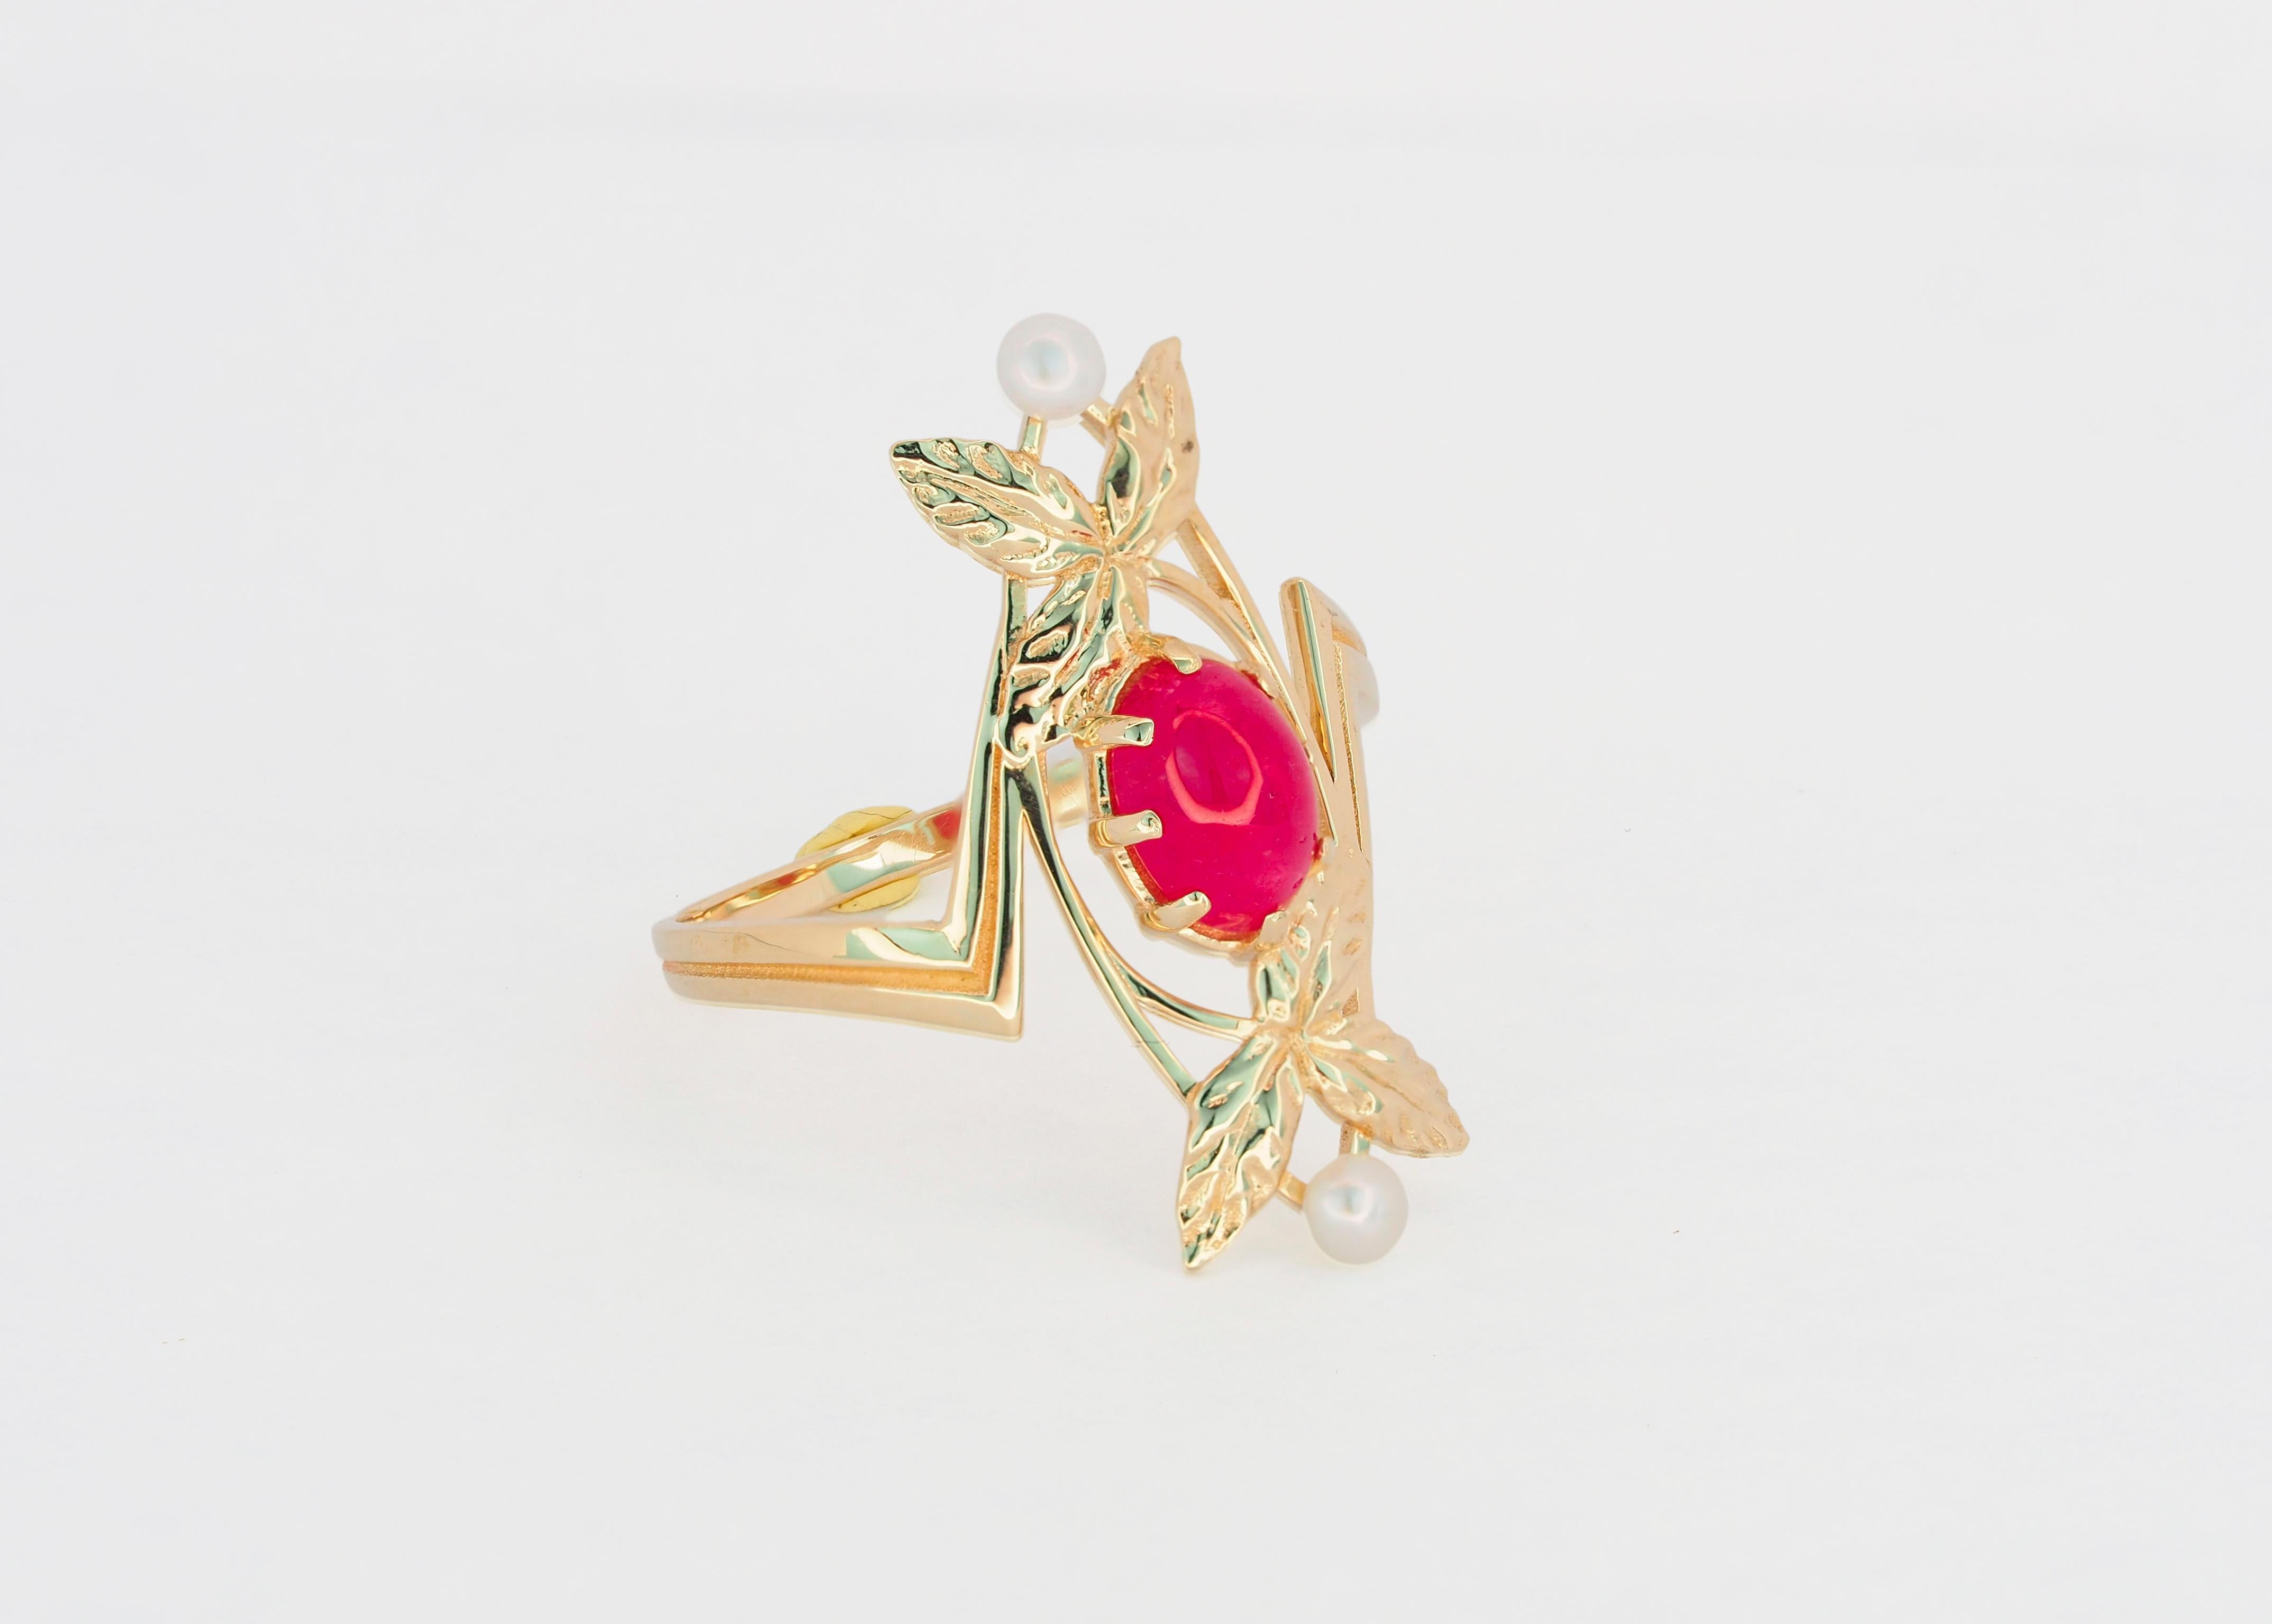 Modern 14k Gold Ring with Ruby and Pearls, Vintage Style Ring with Ruby